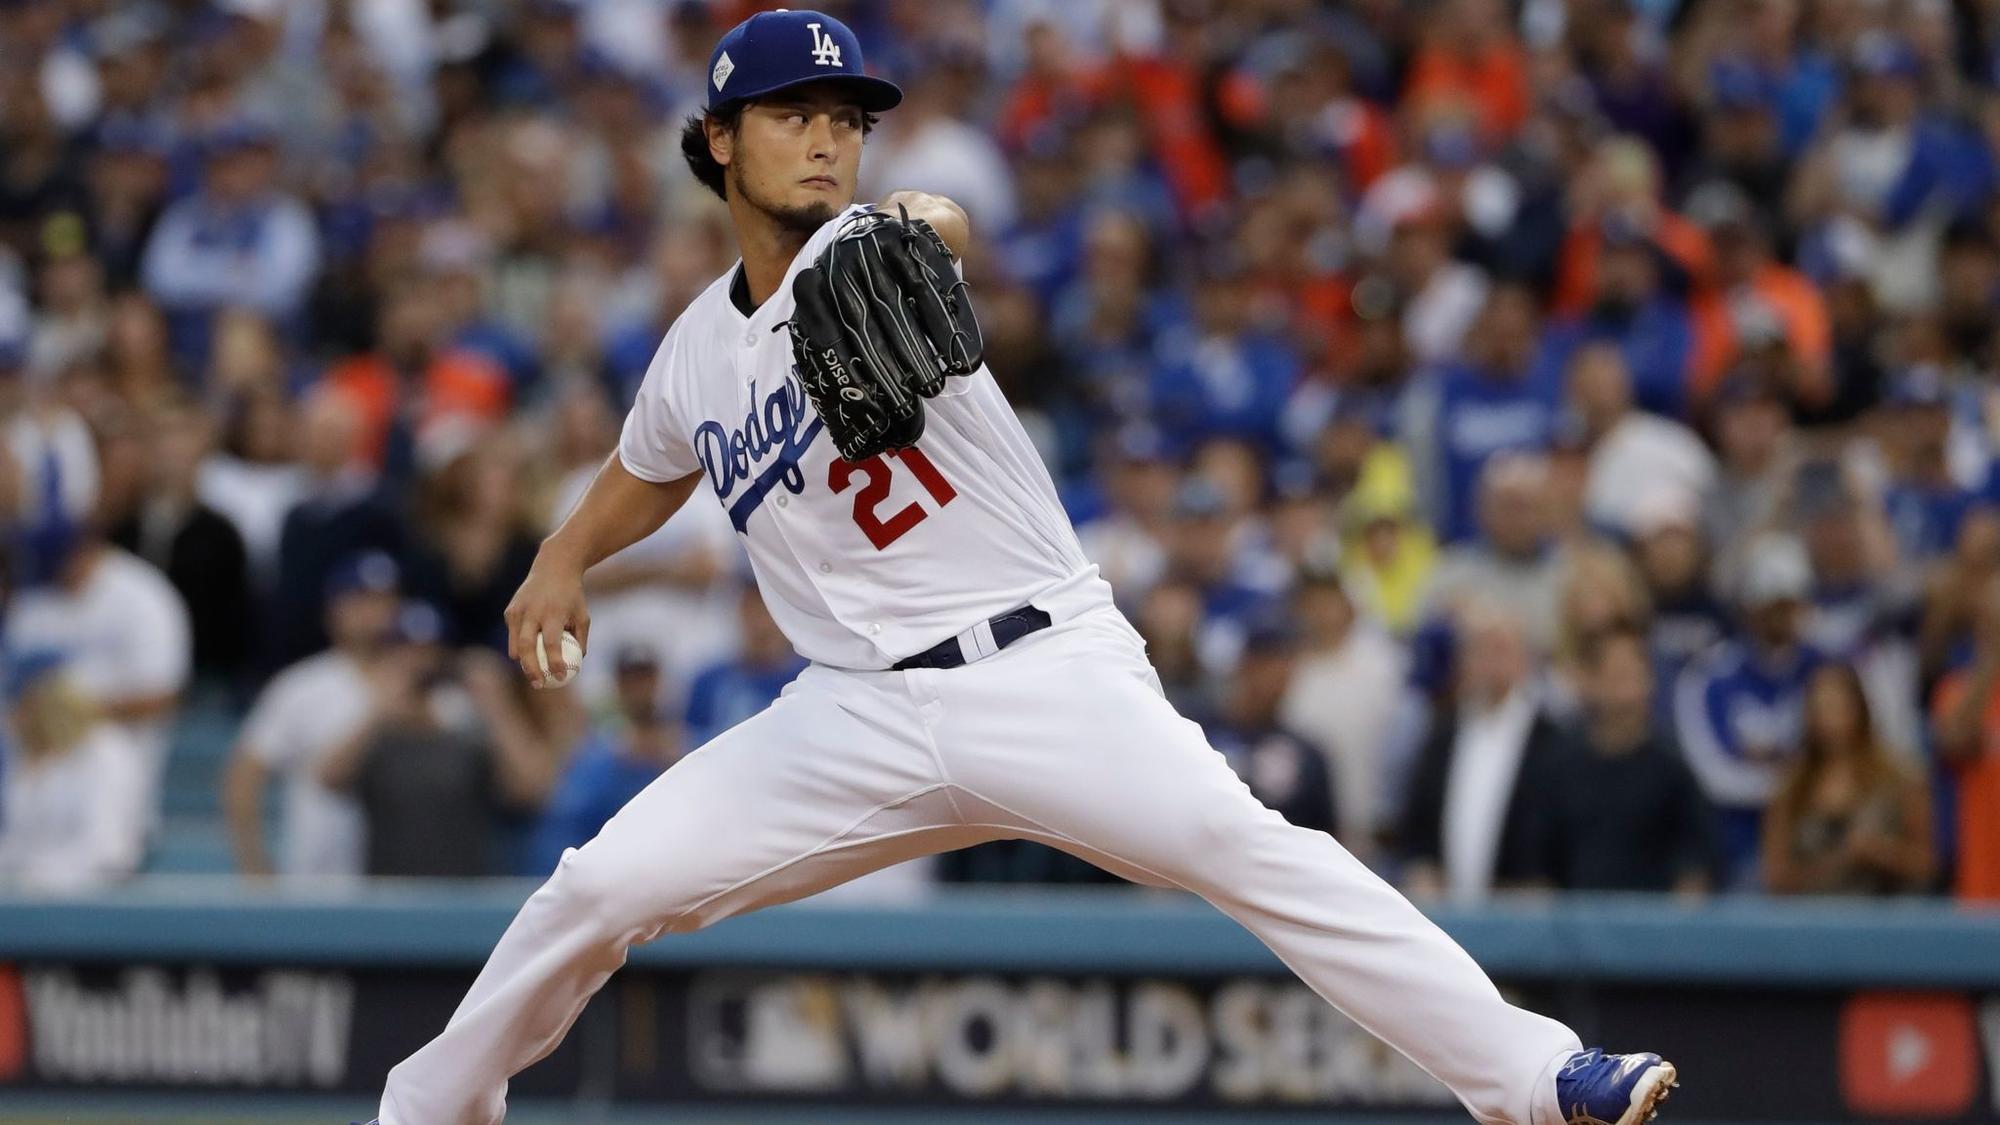 Cubs agree to terms with pitcher Yu Darvish on six-year, $126 million deal